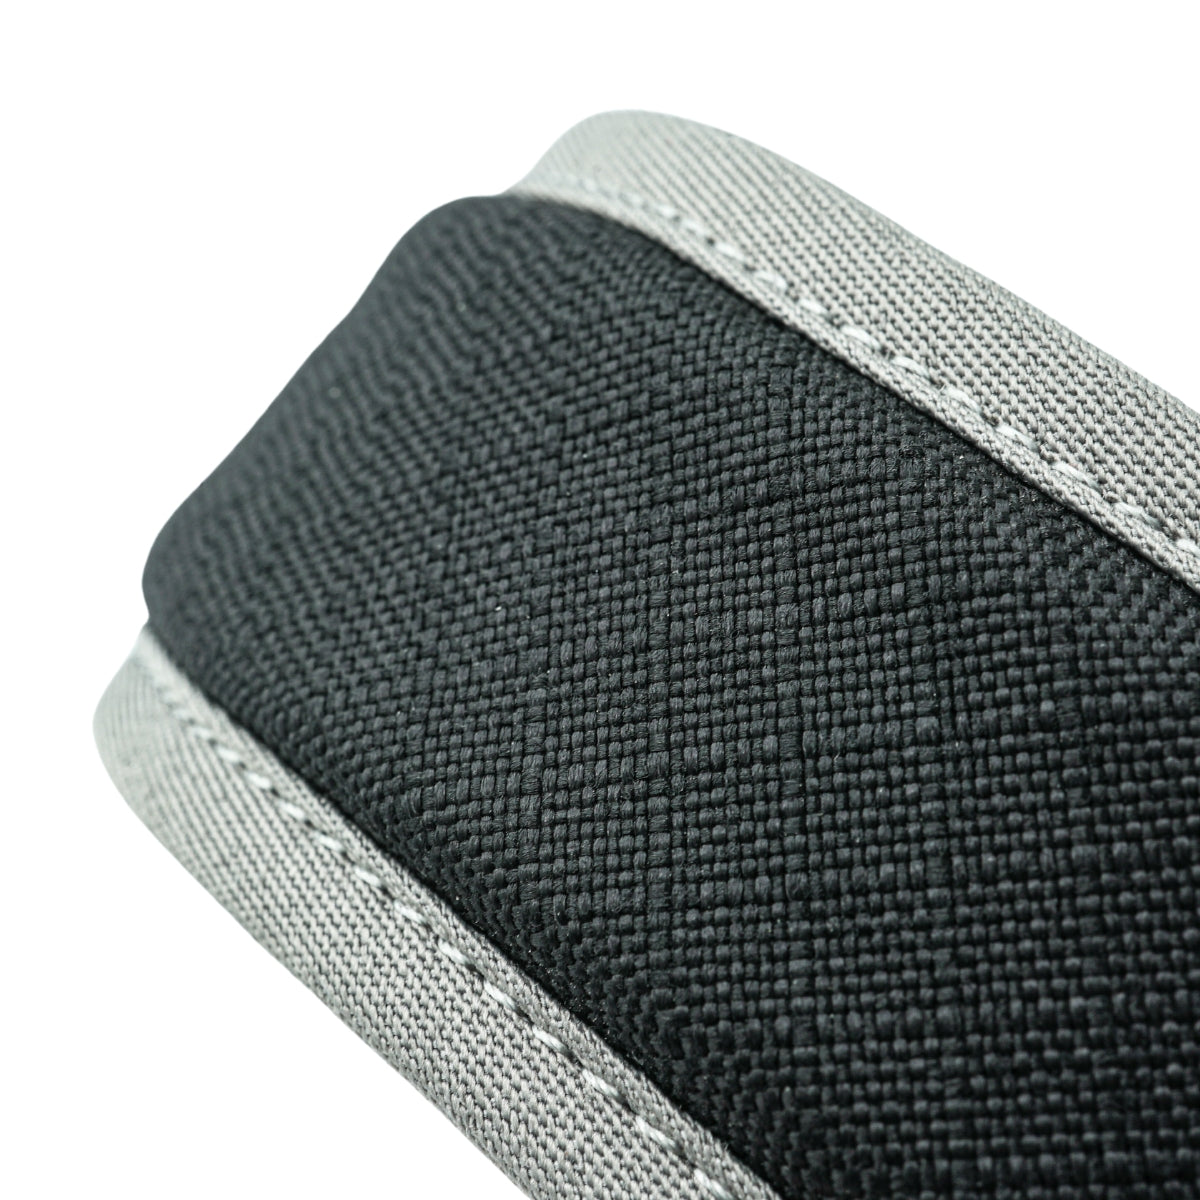 Detailed close up view of the material Dupon Cordura Fabric for the outer layer of the dog collar